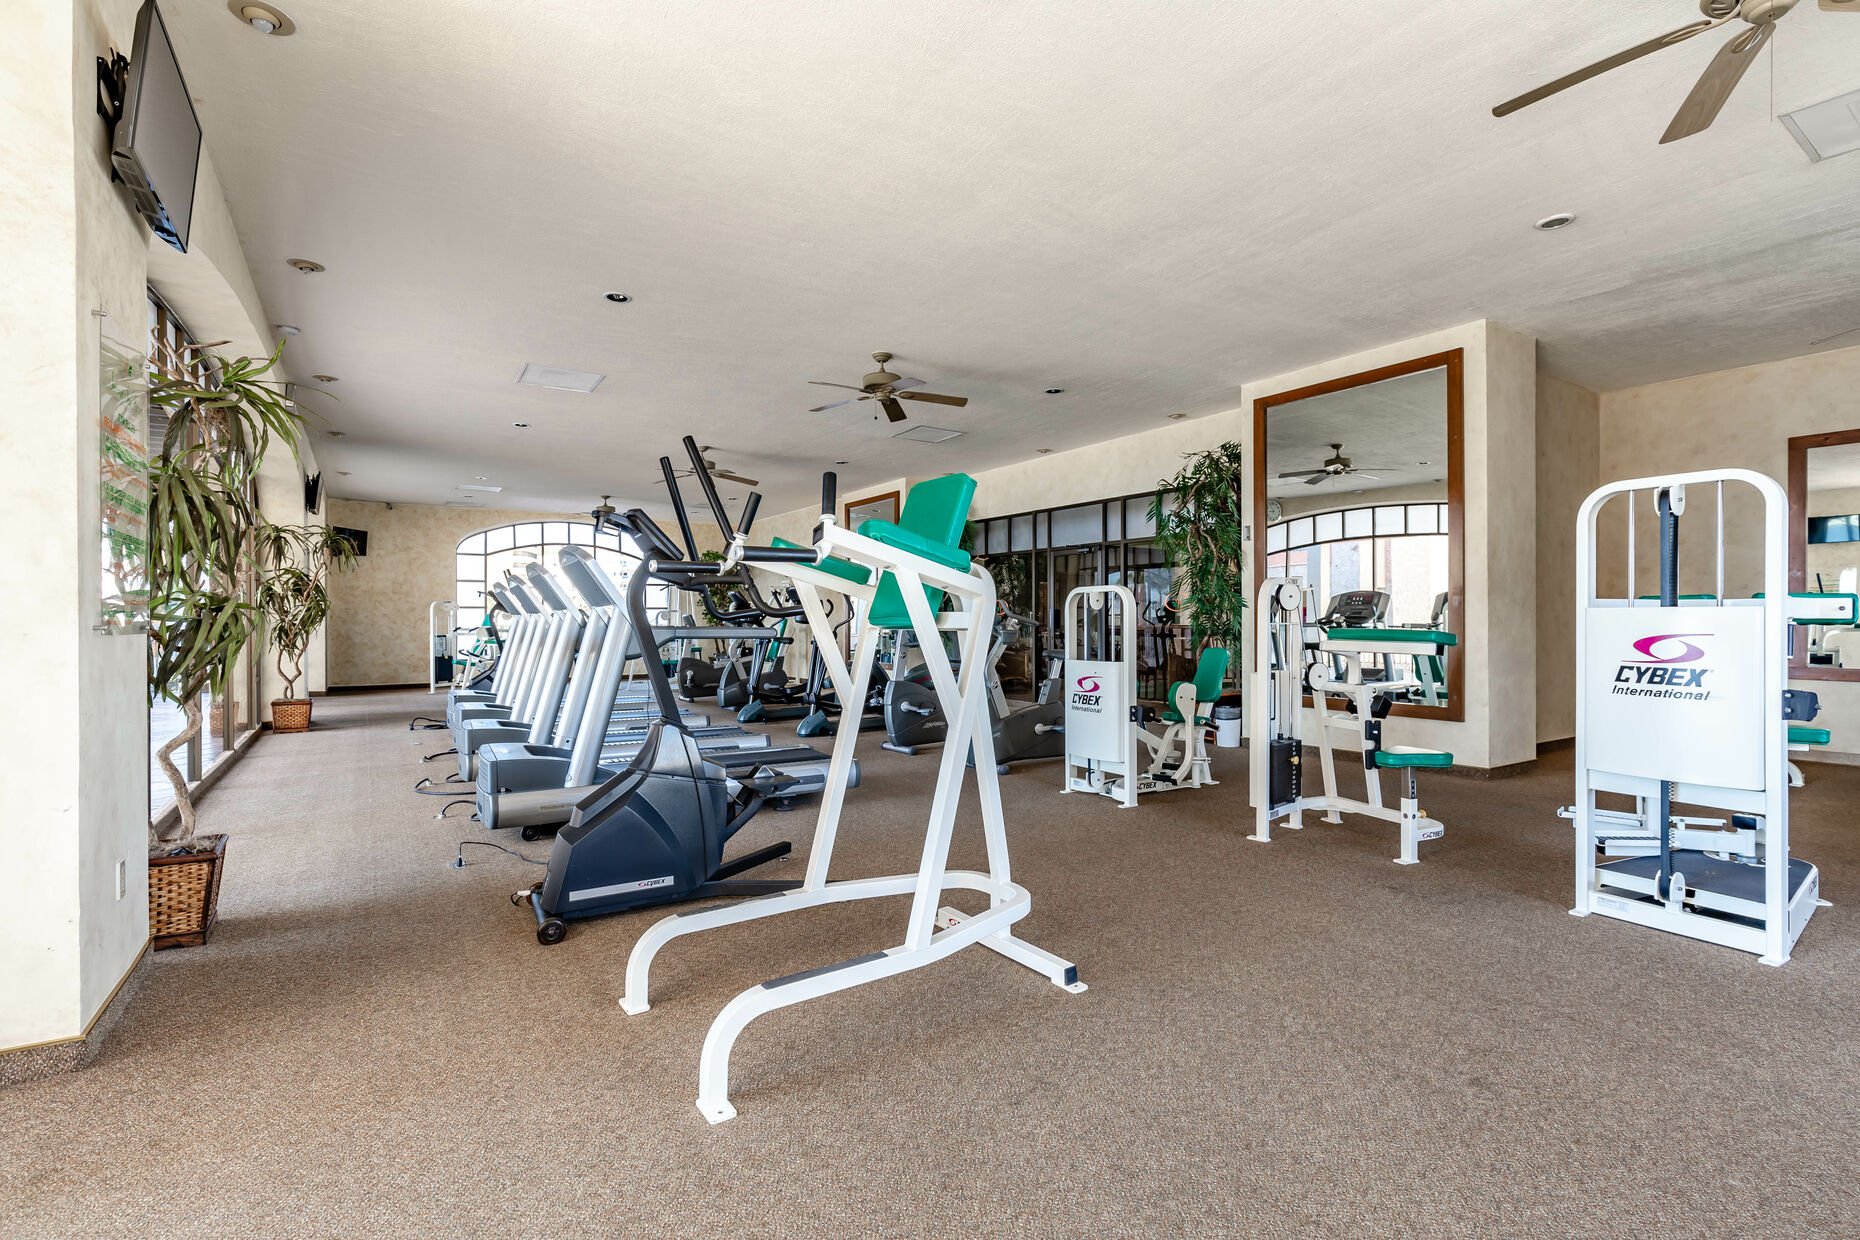 Gym located on 2nd floor